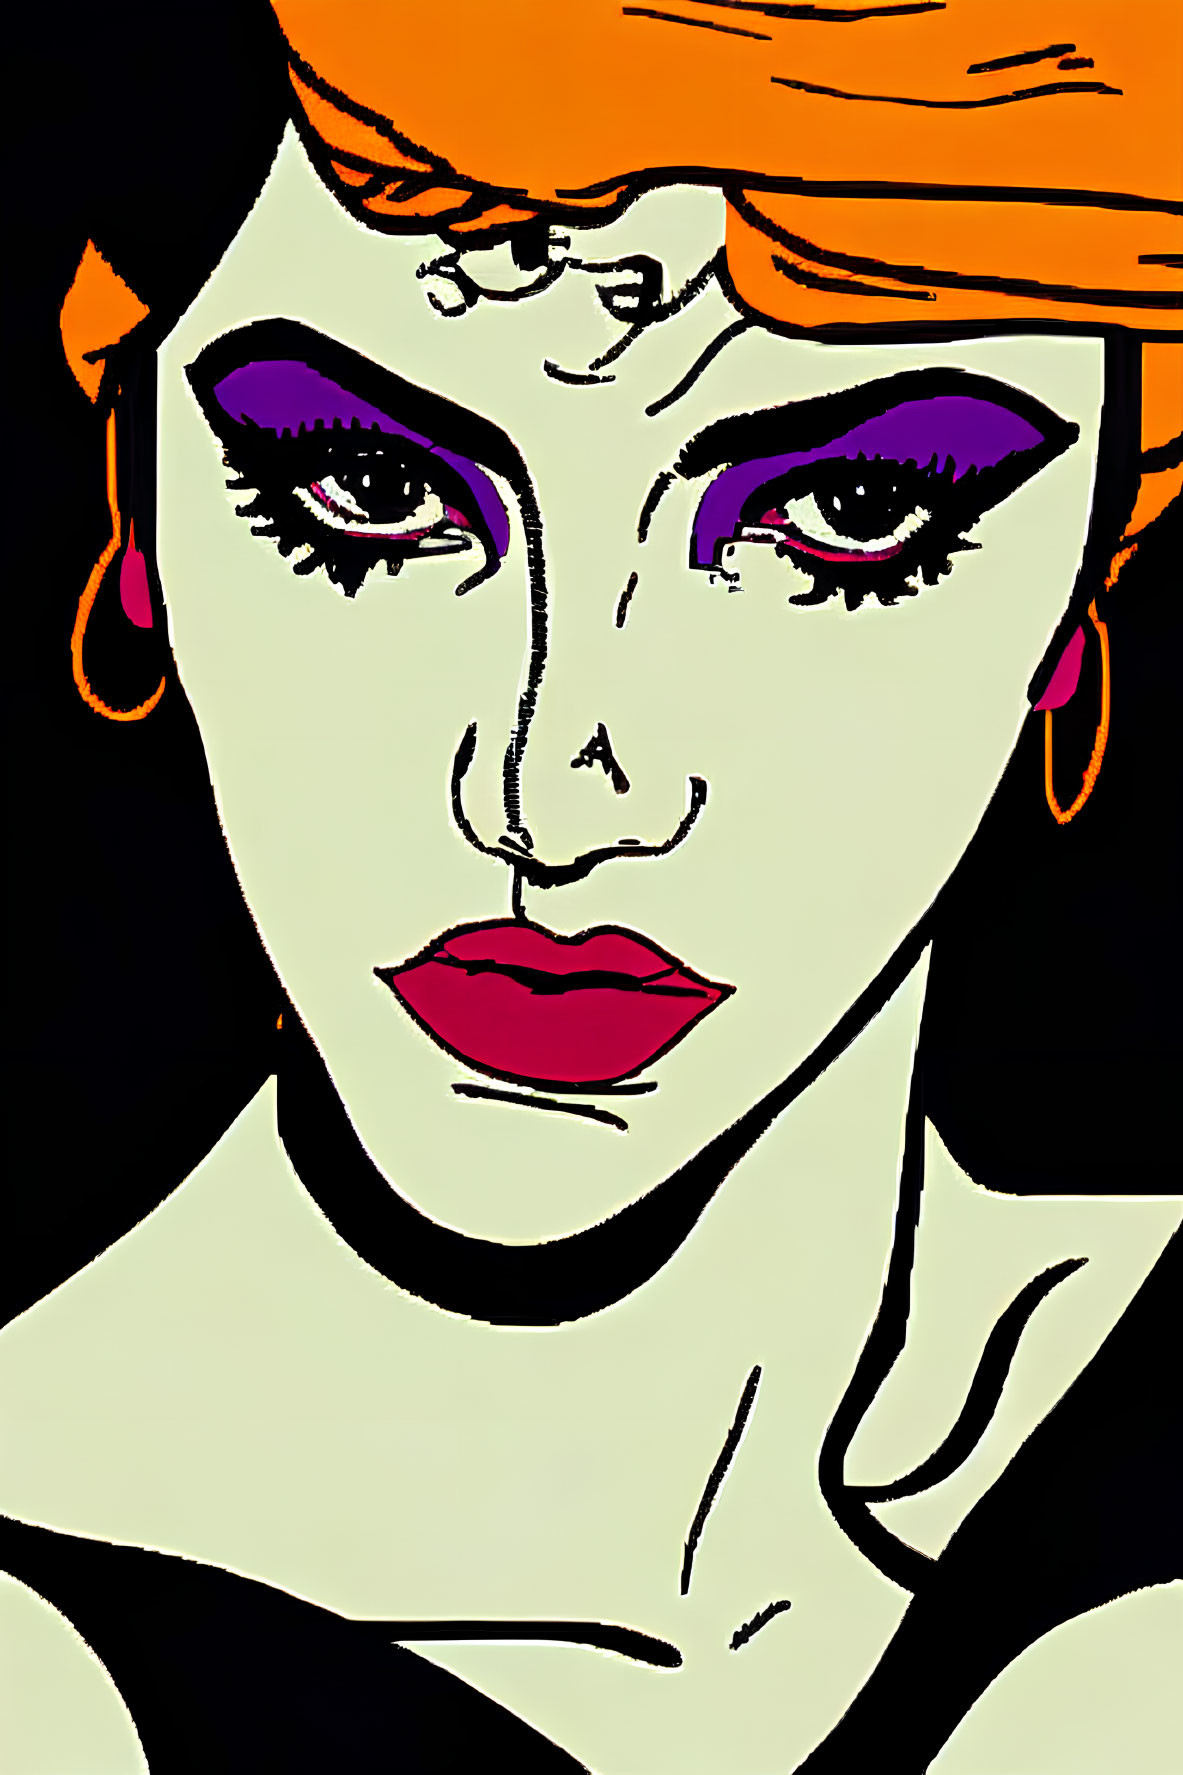 Colorful portrait of a woman with purple eyeshadow, red lips, orange headscarf,